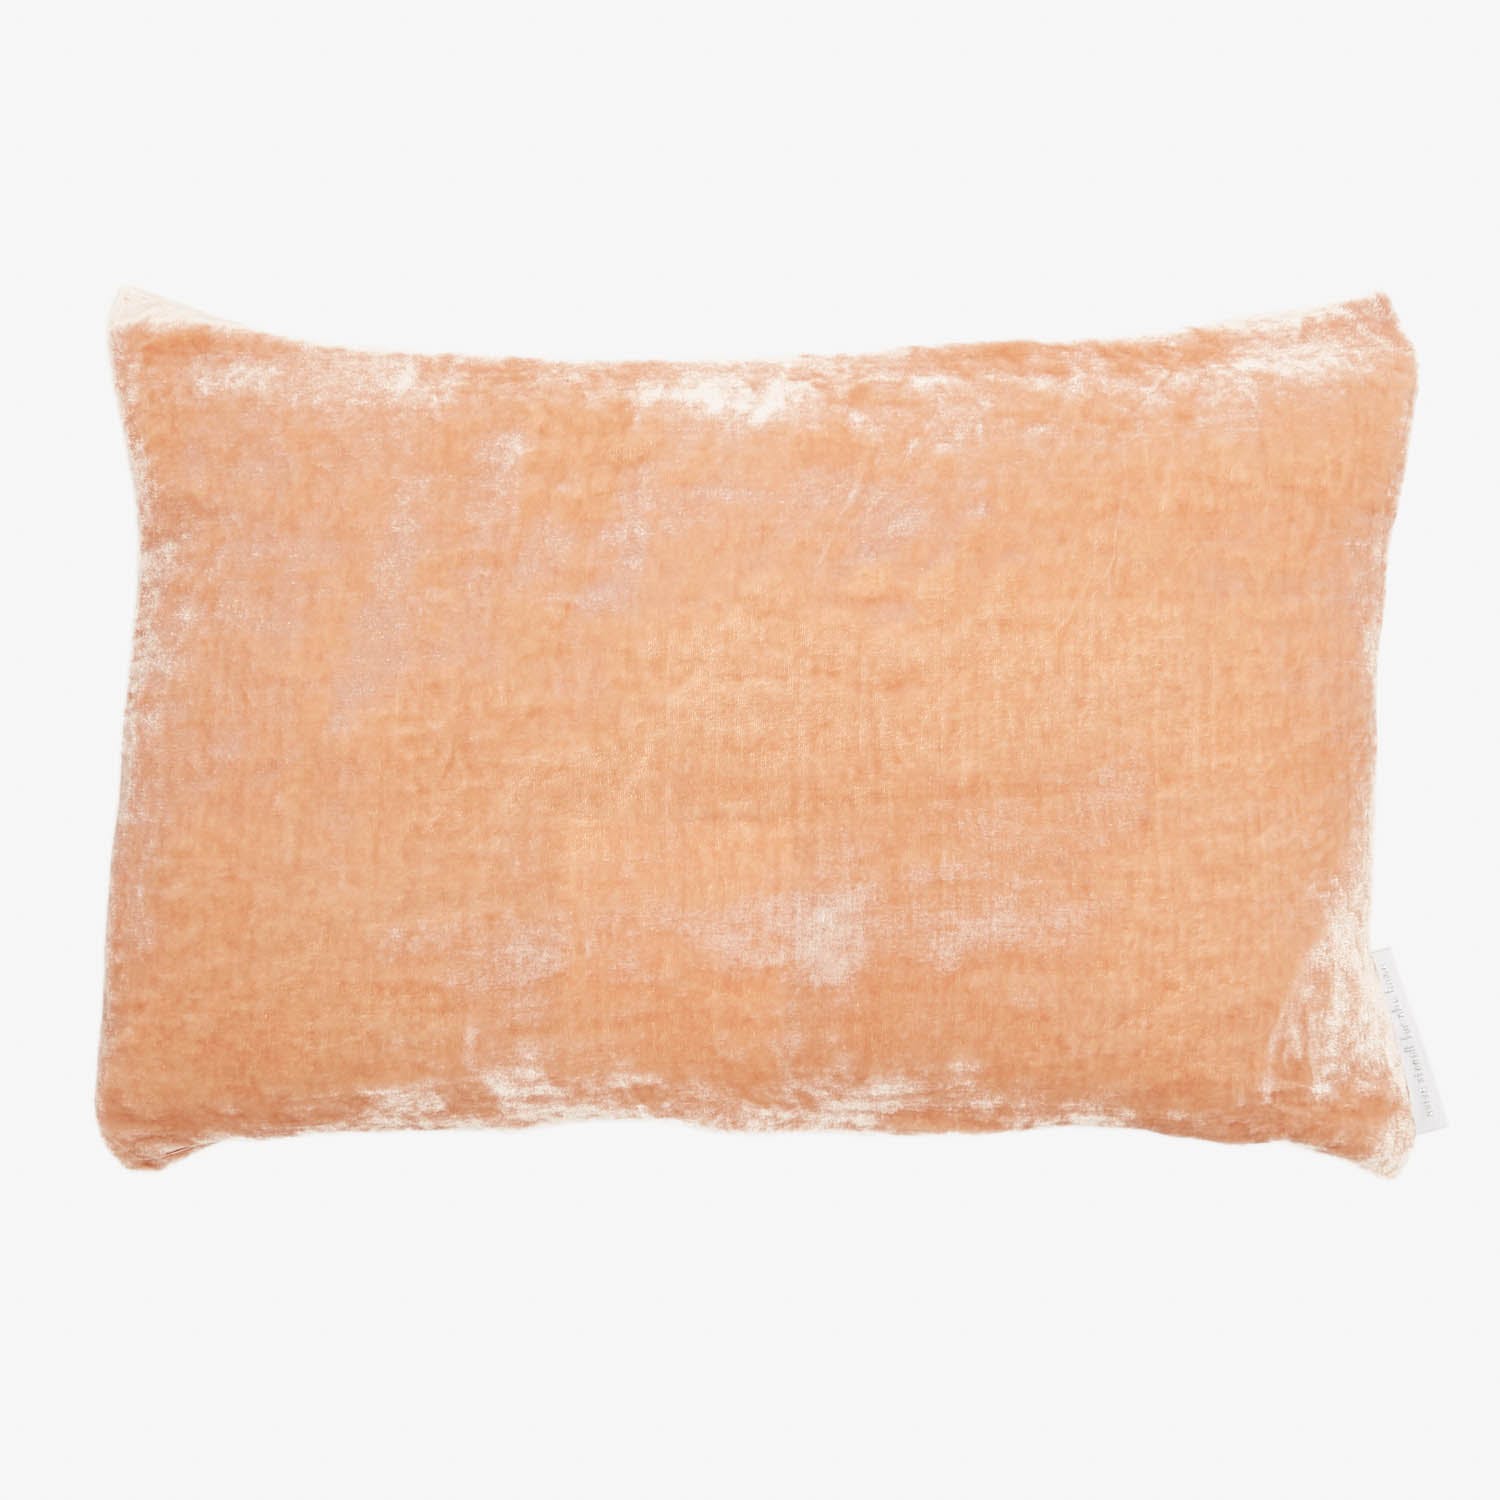 Soft, plush rectangular pillow in pale orange color on white background.